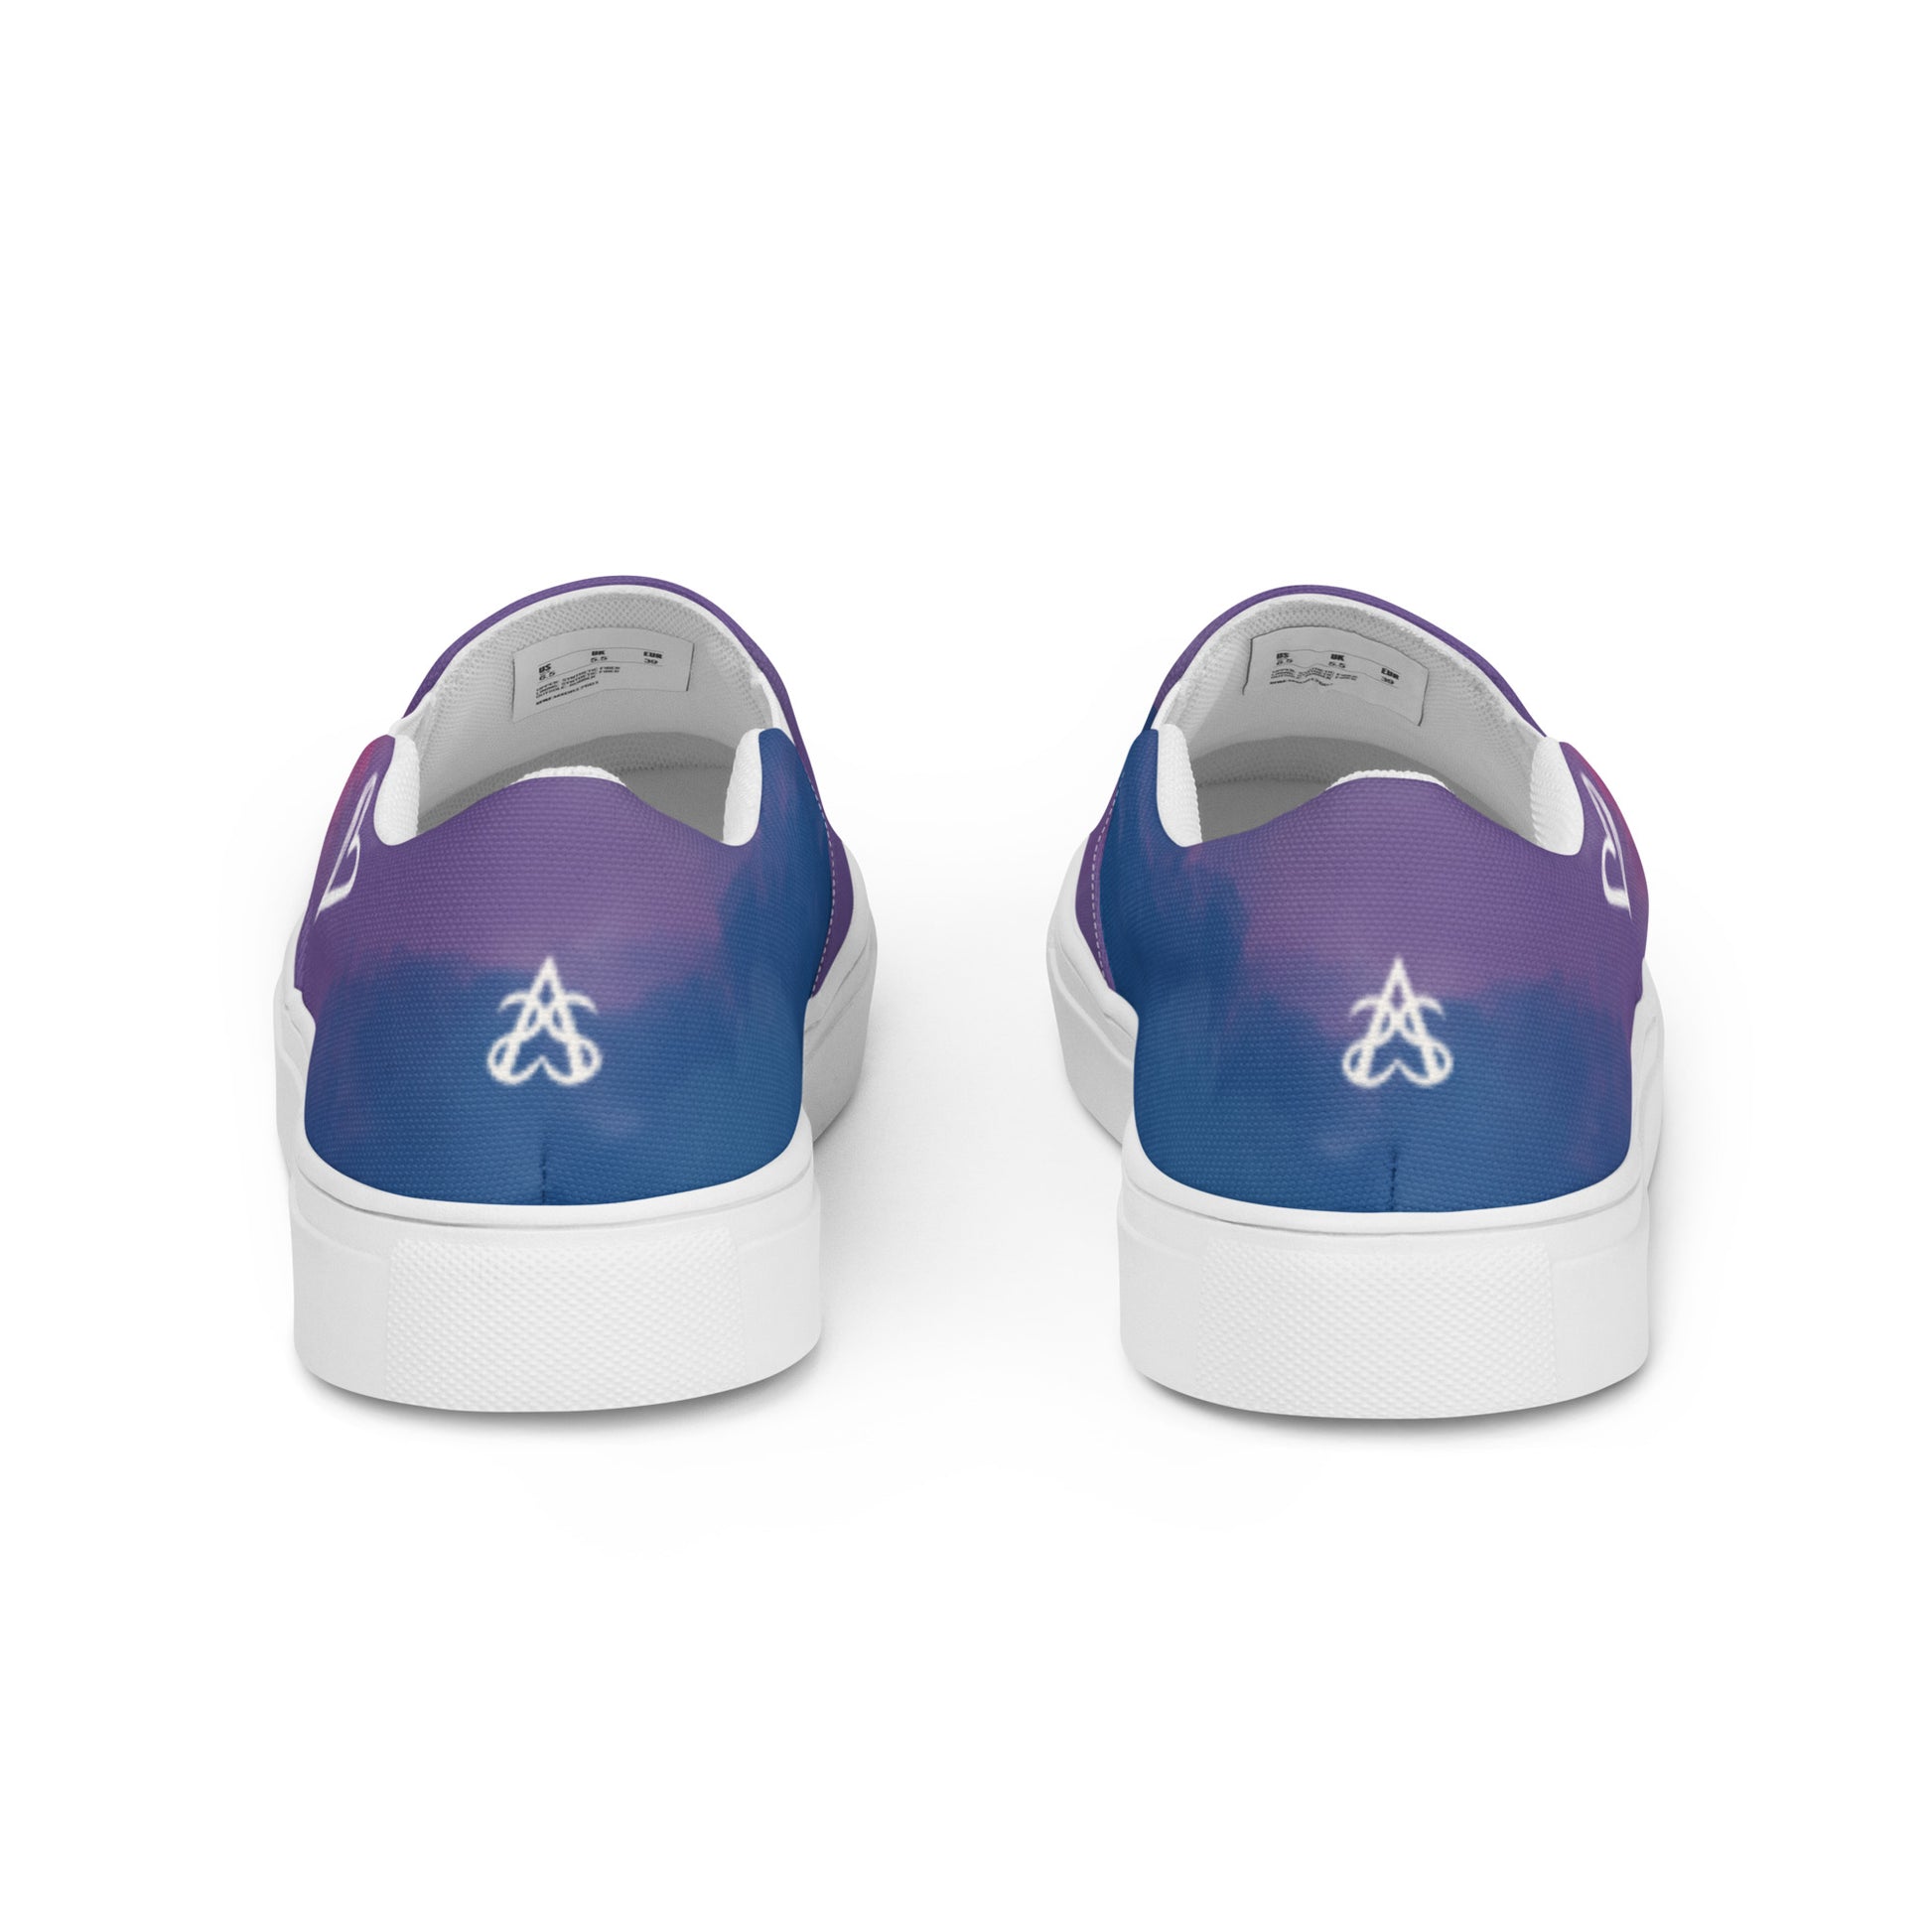 Back view: a pair of slip on shoes with color block pink, purple, and blue clouds, a white hand drawn heart, and the Aras Sivad logo on the back.